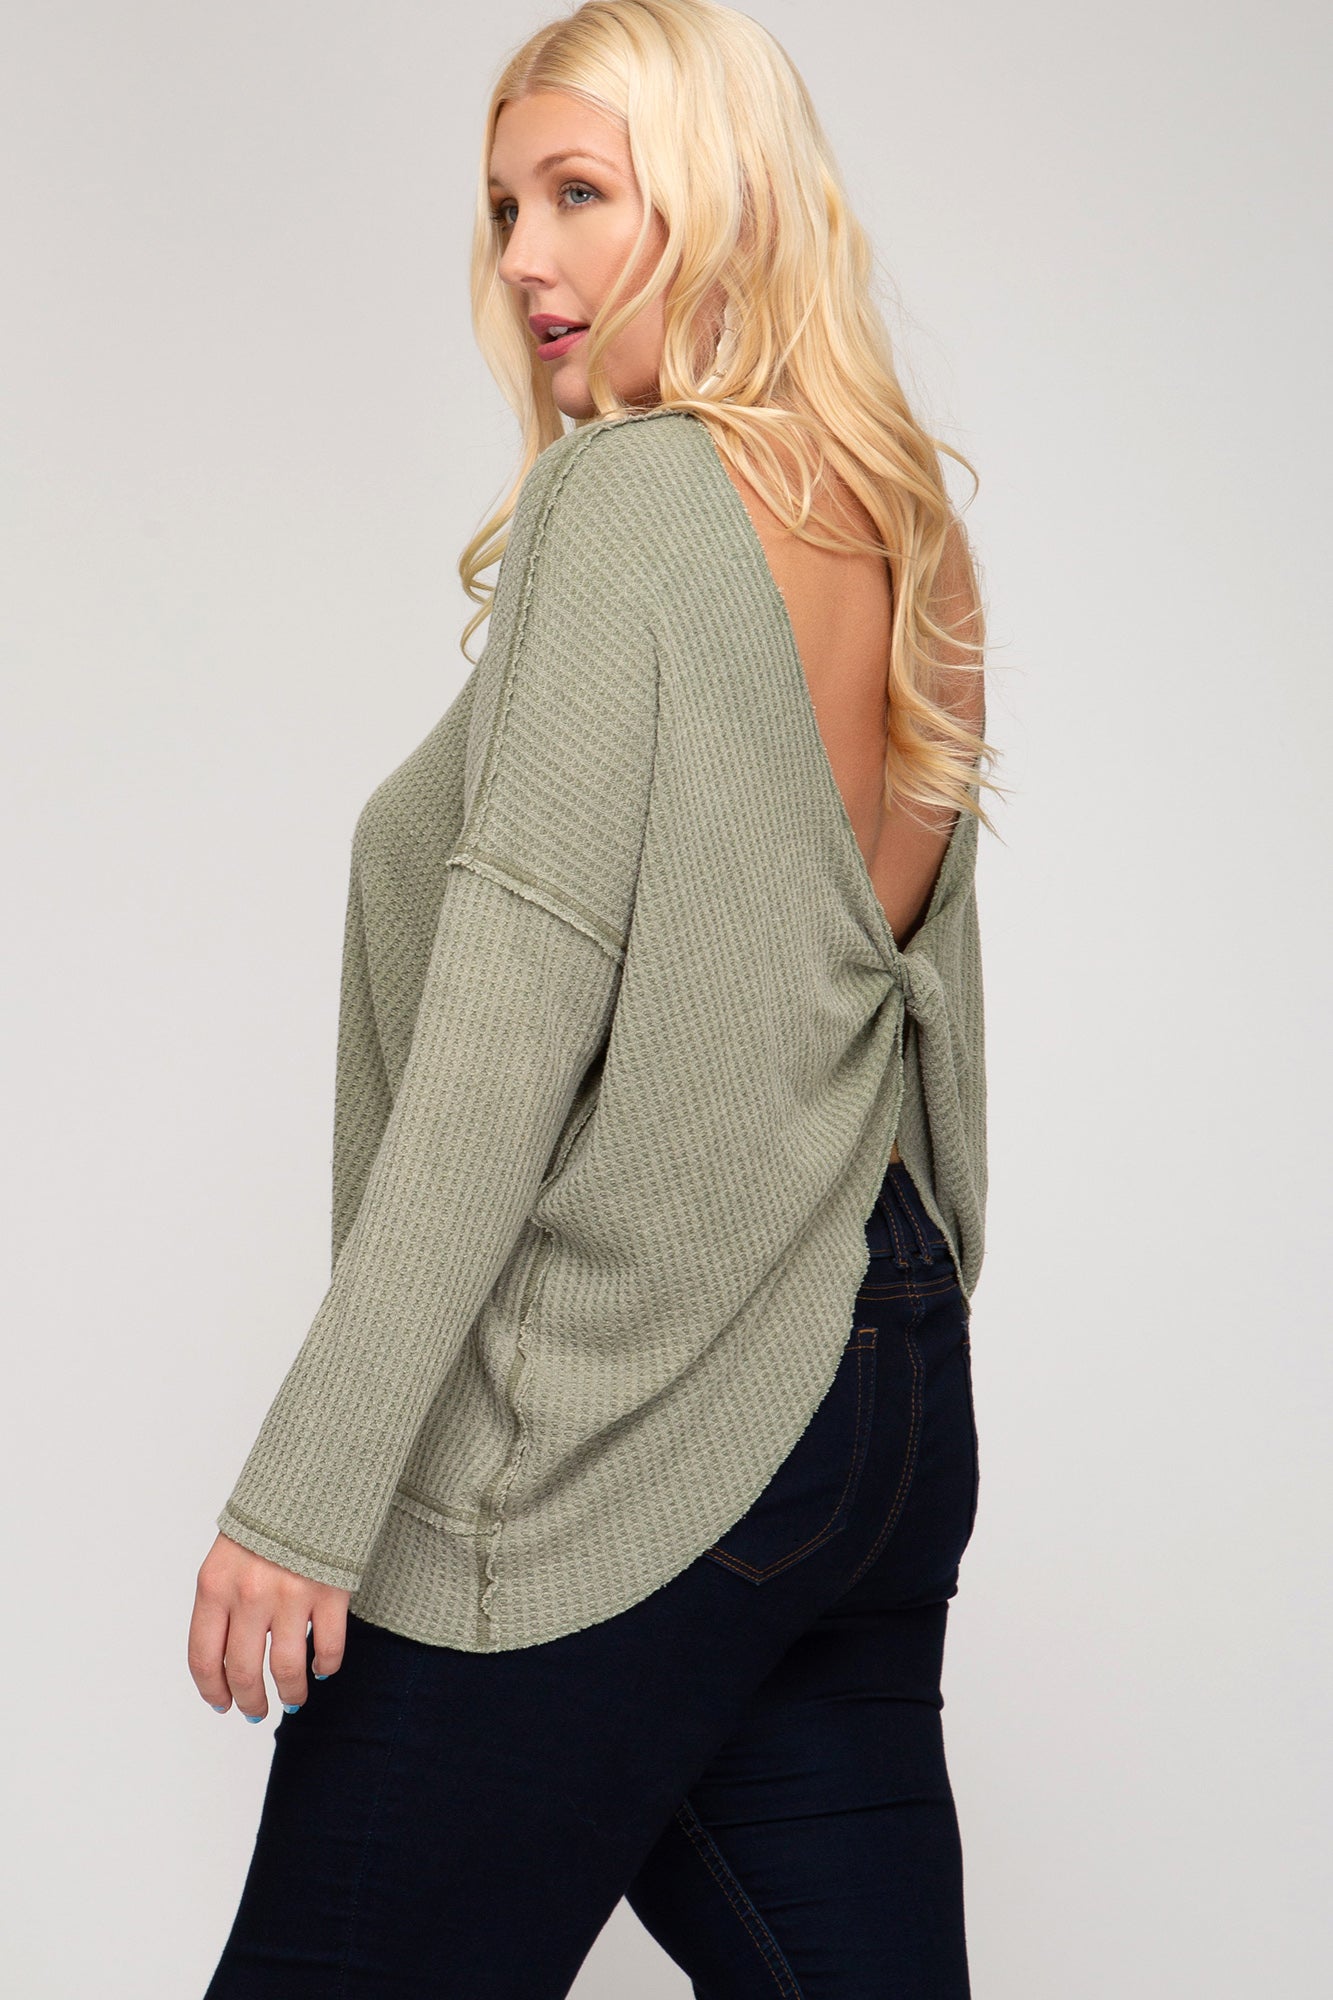 LONG SLEEVE GARMENT DYED PULLOVER KNIT TOP WITH TWISTED OPEN BACK DETAIL